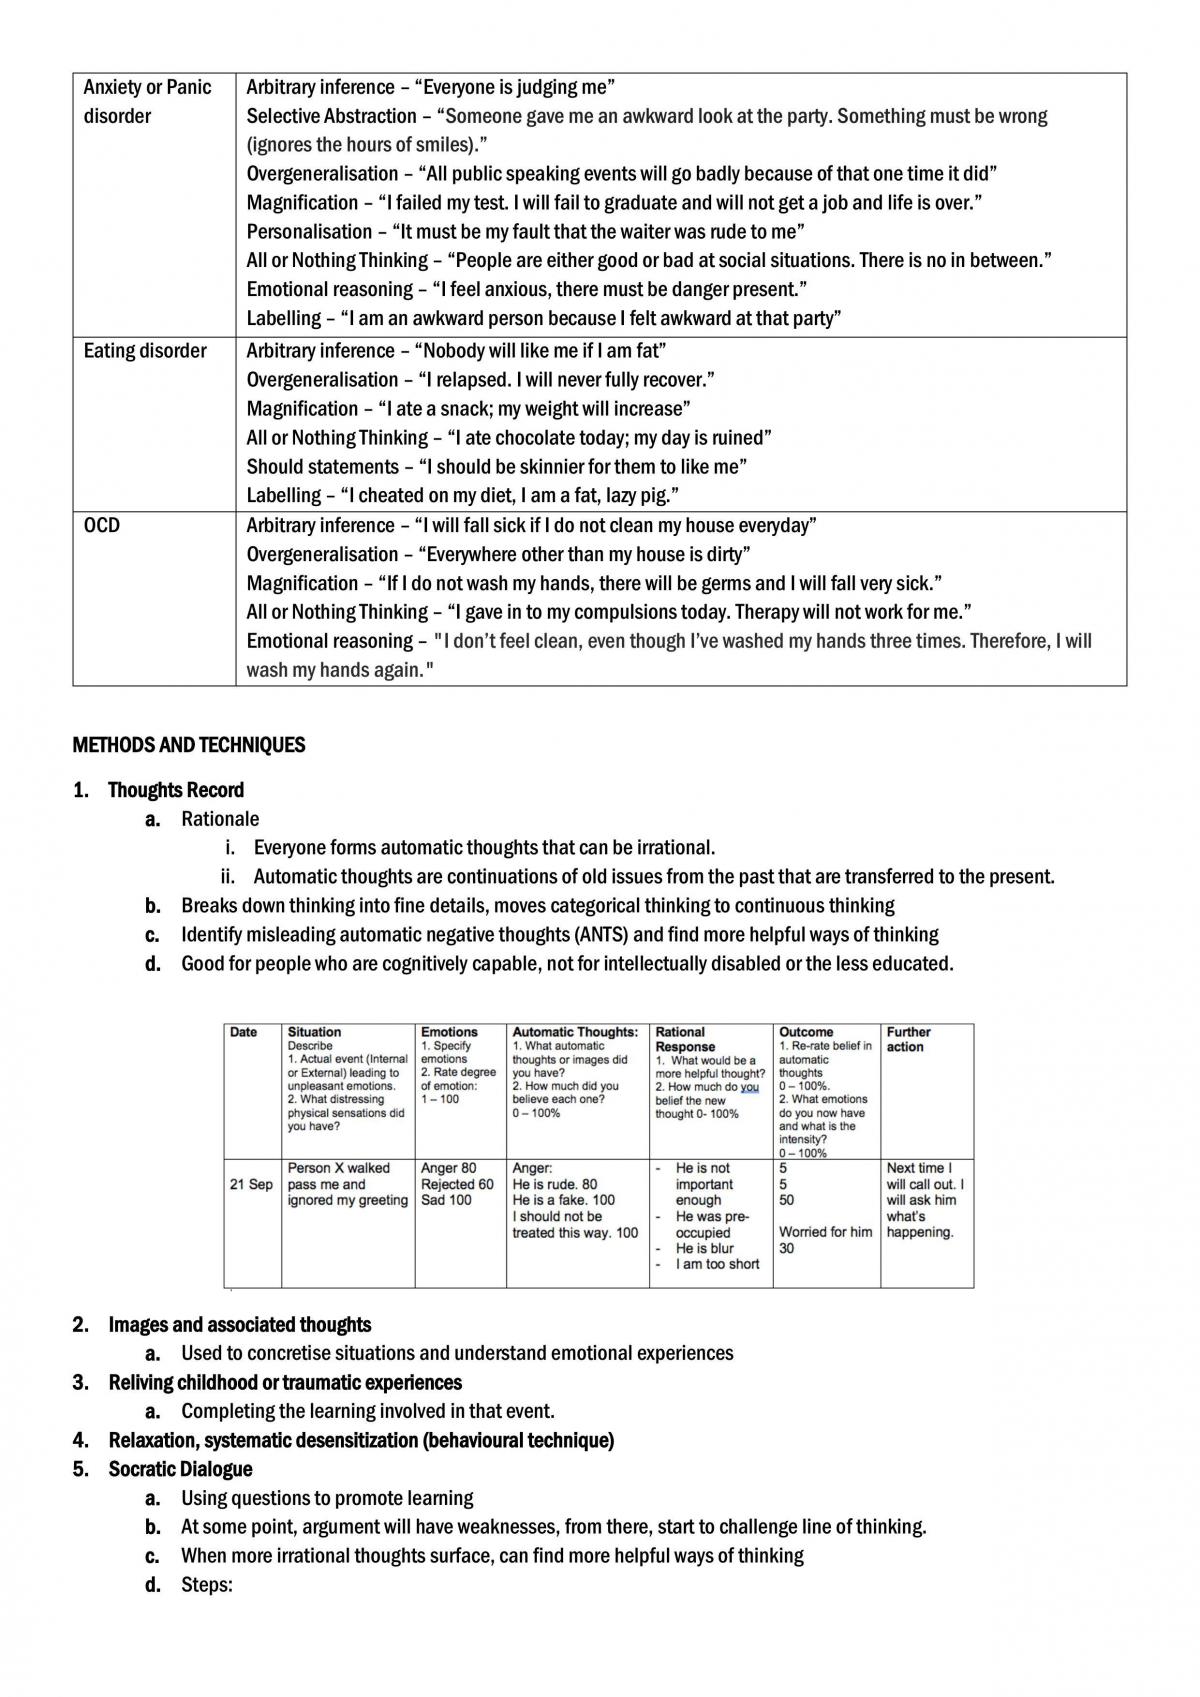 SW3209 Counselling Theories & Practice Study Notes - Page 19